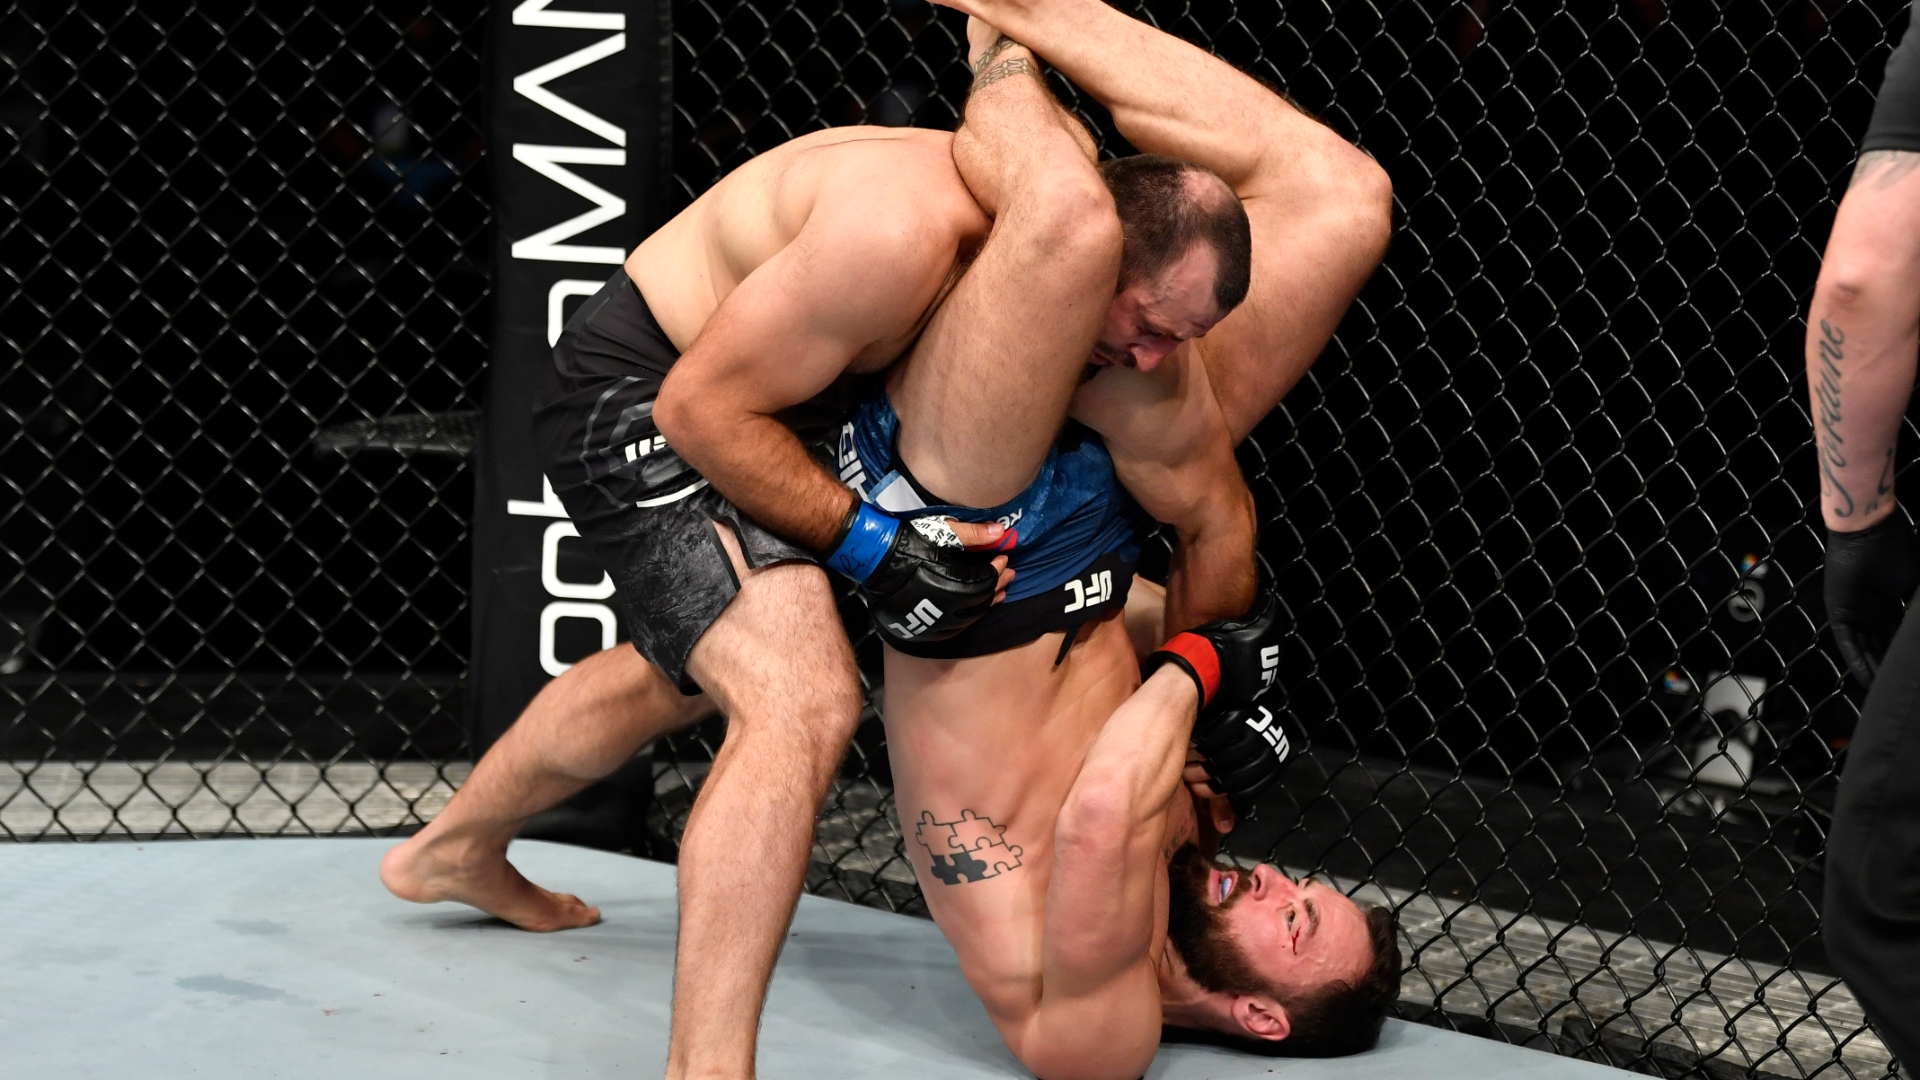 Craig submits Antigulov with triangle choke in Round 1 - Stream the Video